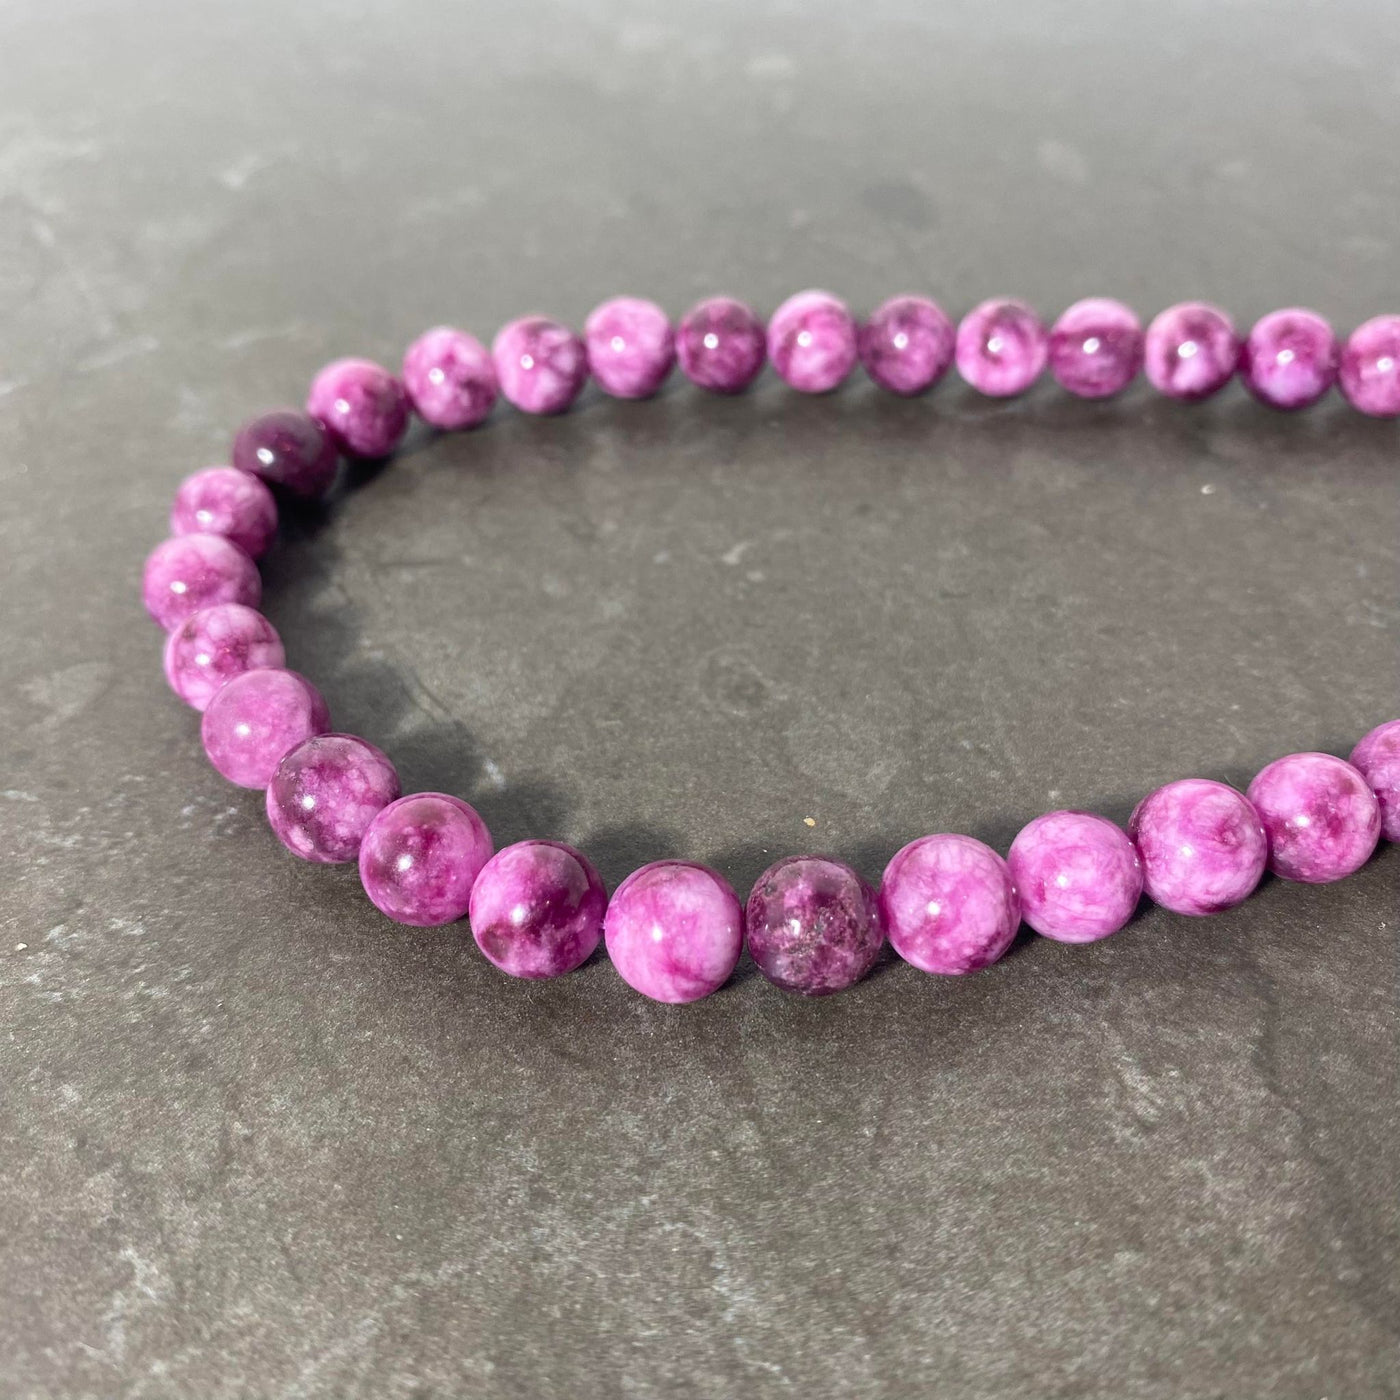 Purplish pink Jade rope with marbled effect